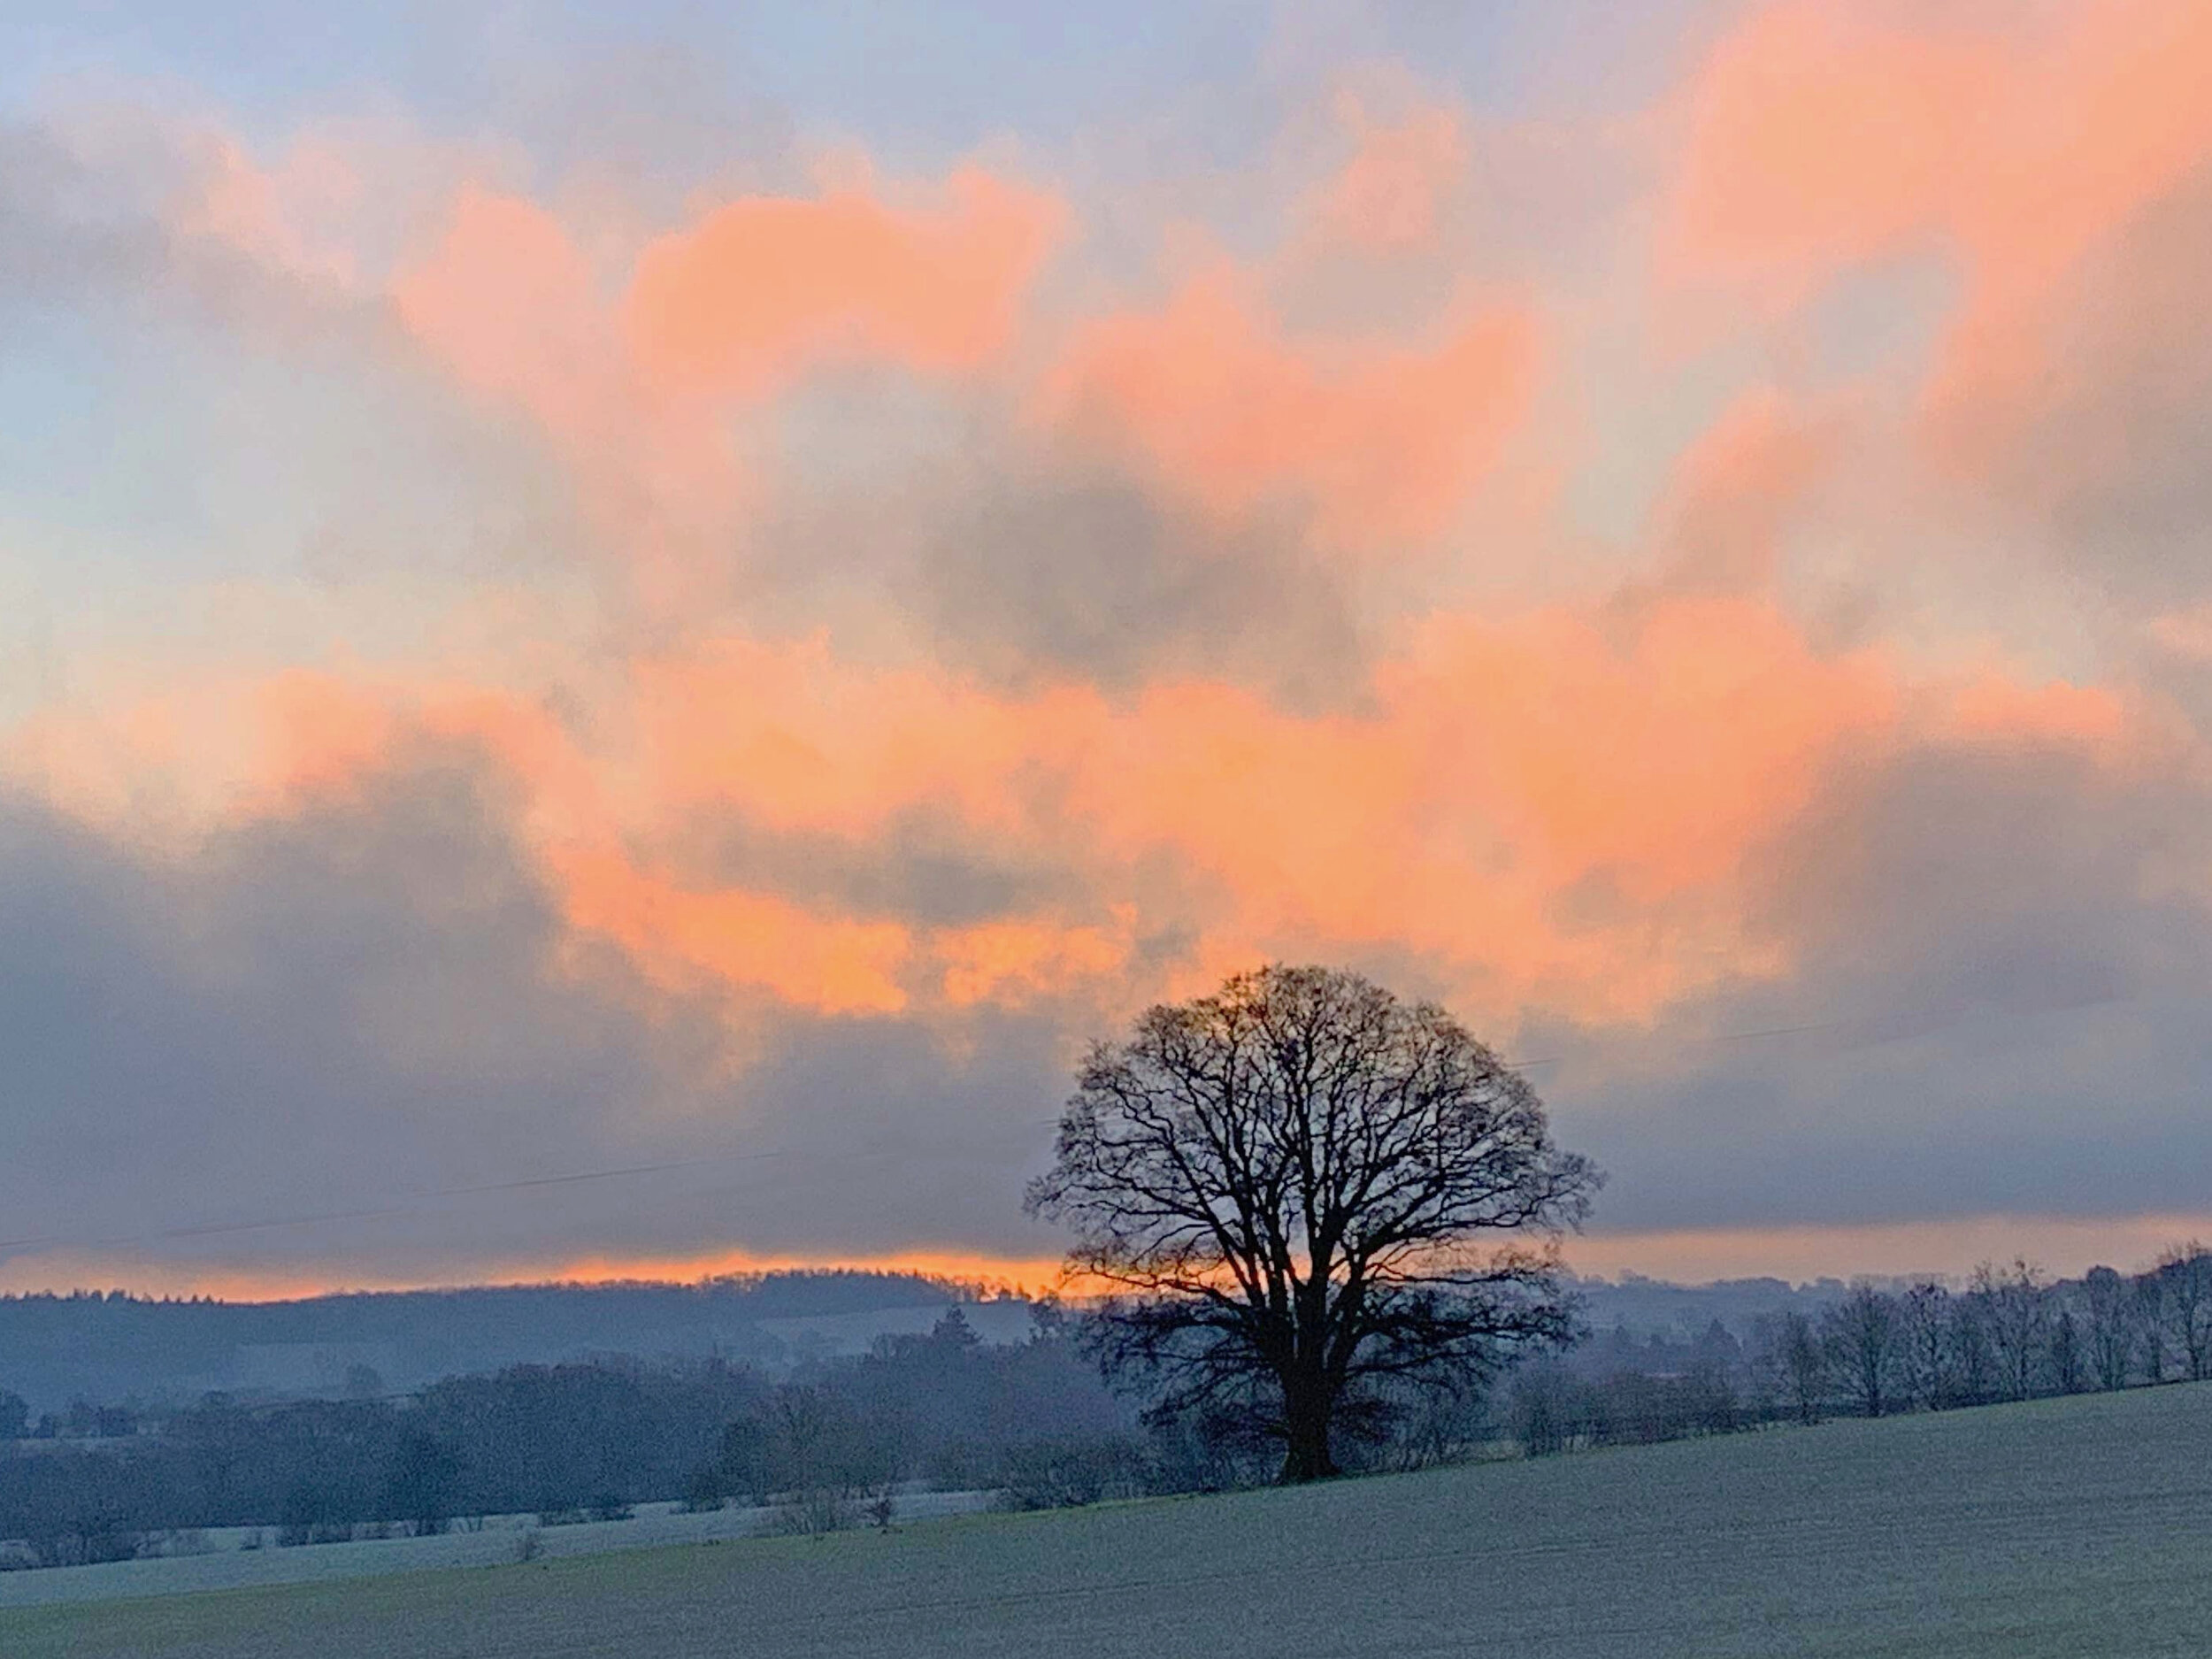 Wintery rural vista with frosty field and large oak tree. Red orange pink sunset in the background